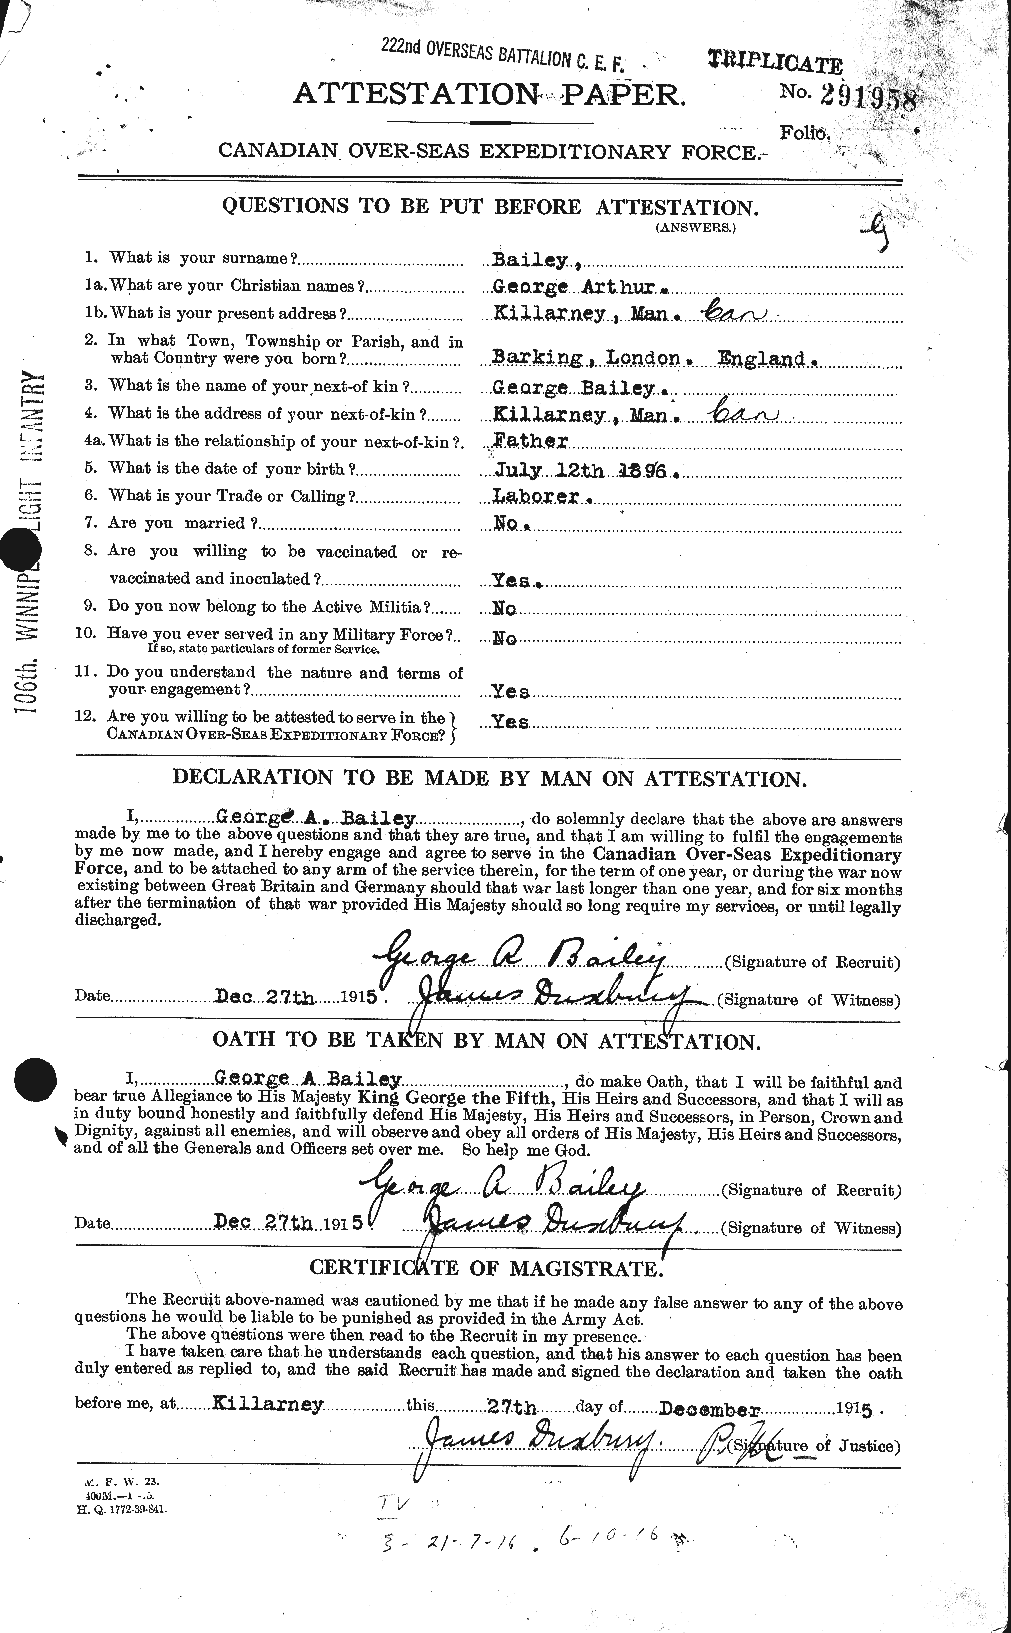 Personnel Records of the First World War - CEF 218953a